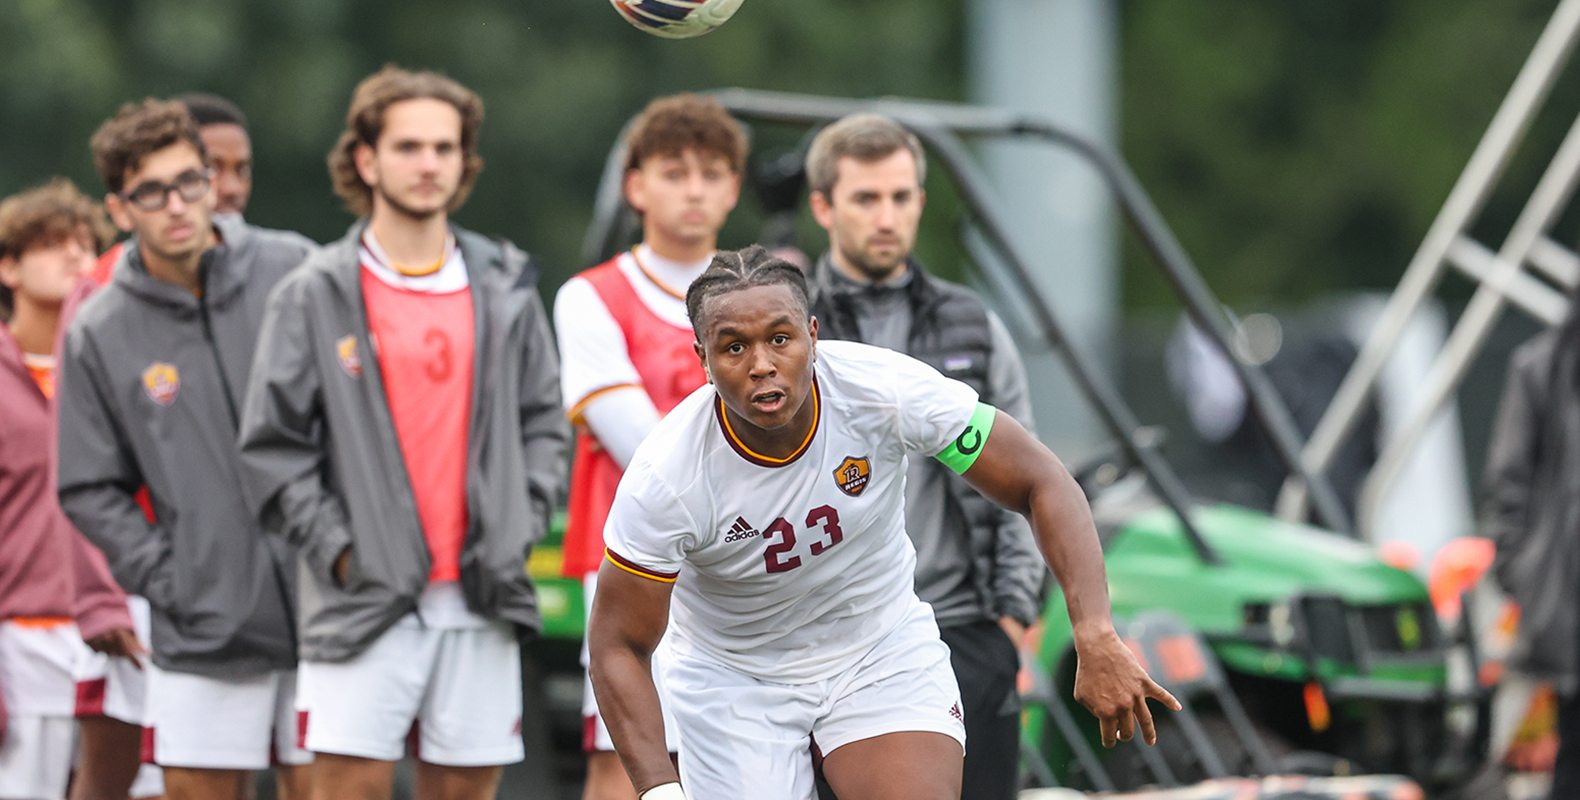 Men’s Soccer Pulls Out 1-0 Victory Over Lasell